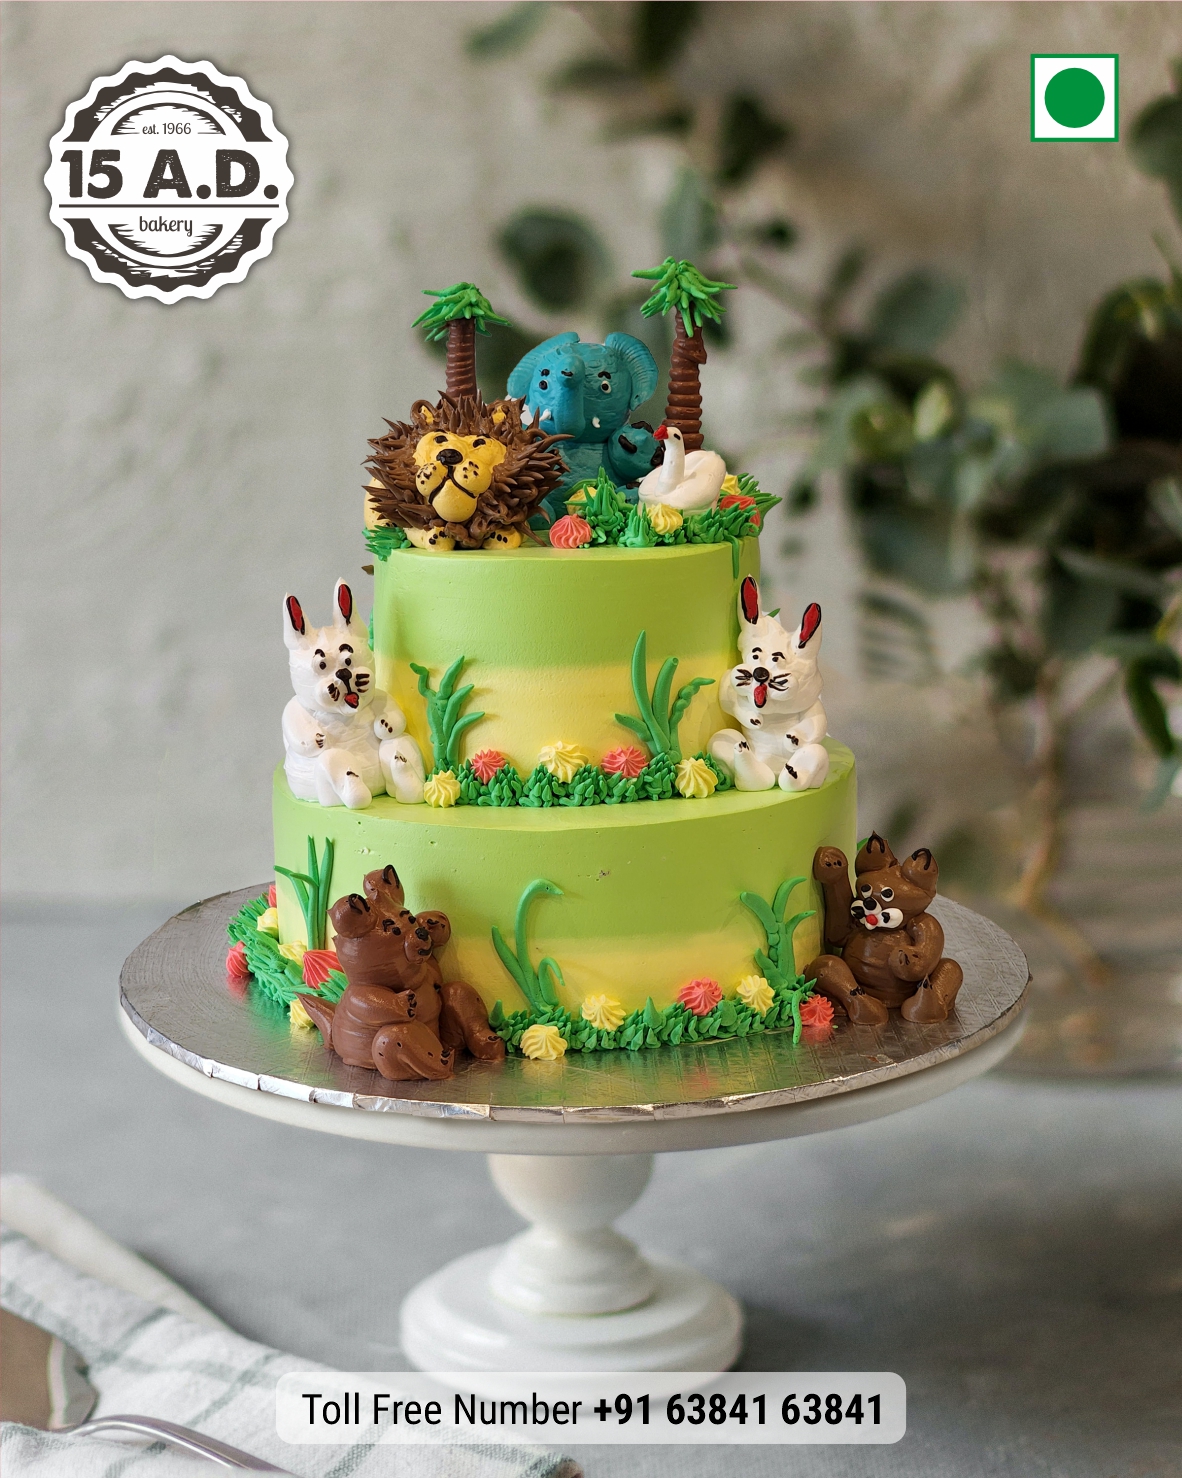 Jungle Theme Cakes by 15 AD Bakery